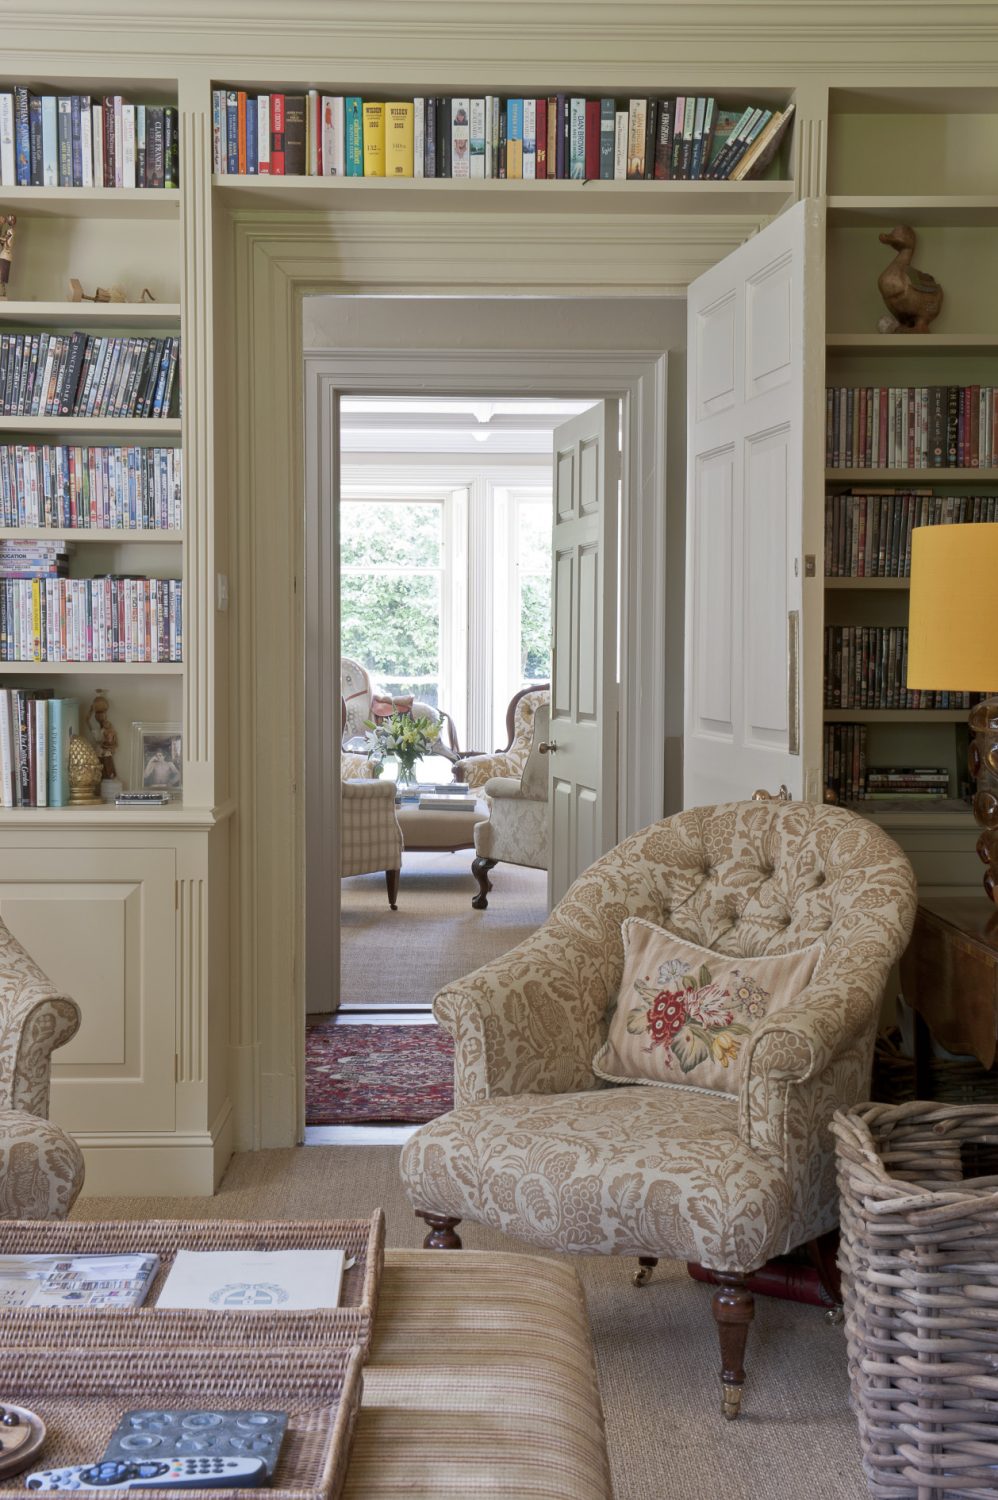 Belinda has lined two of the walls with bookcases made by one of her local joiners and hand-painted them in Farrow & Ball ‘Cord’